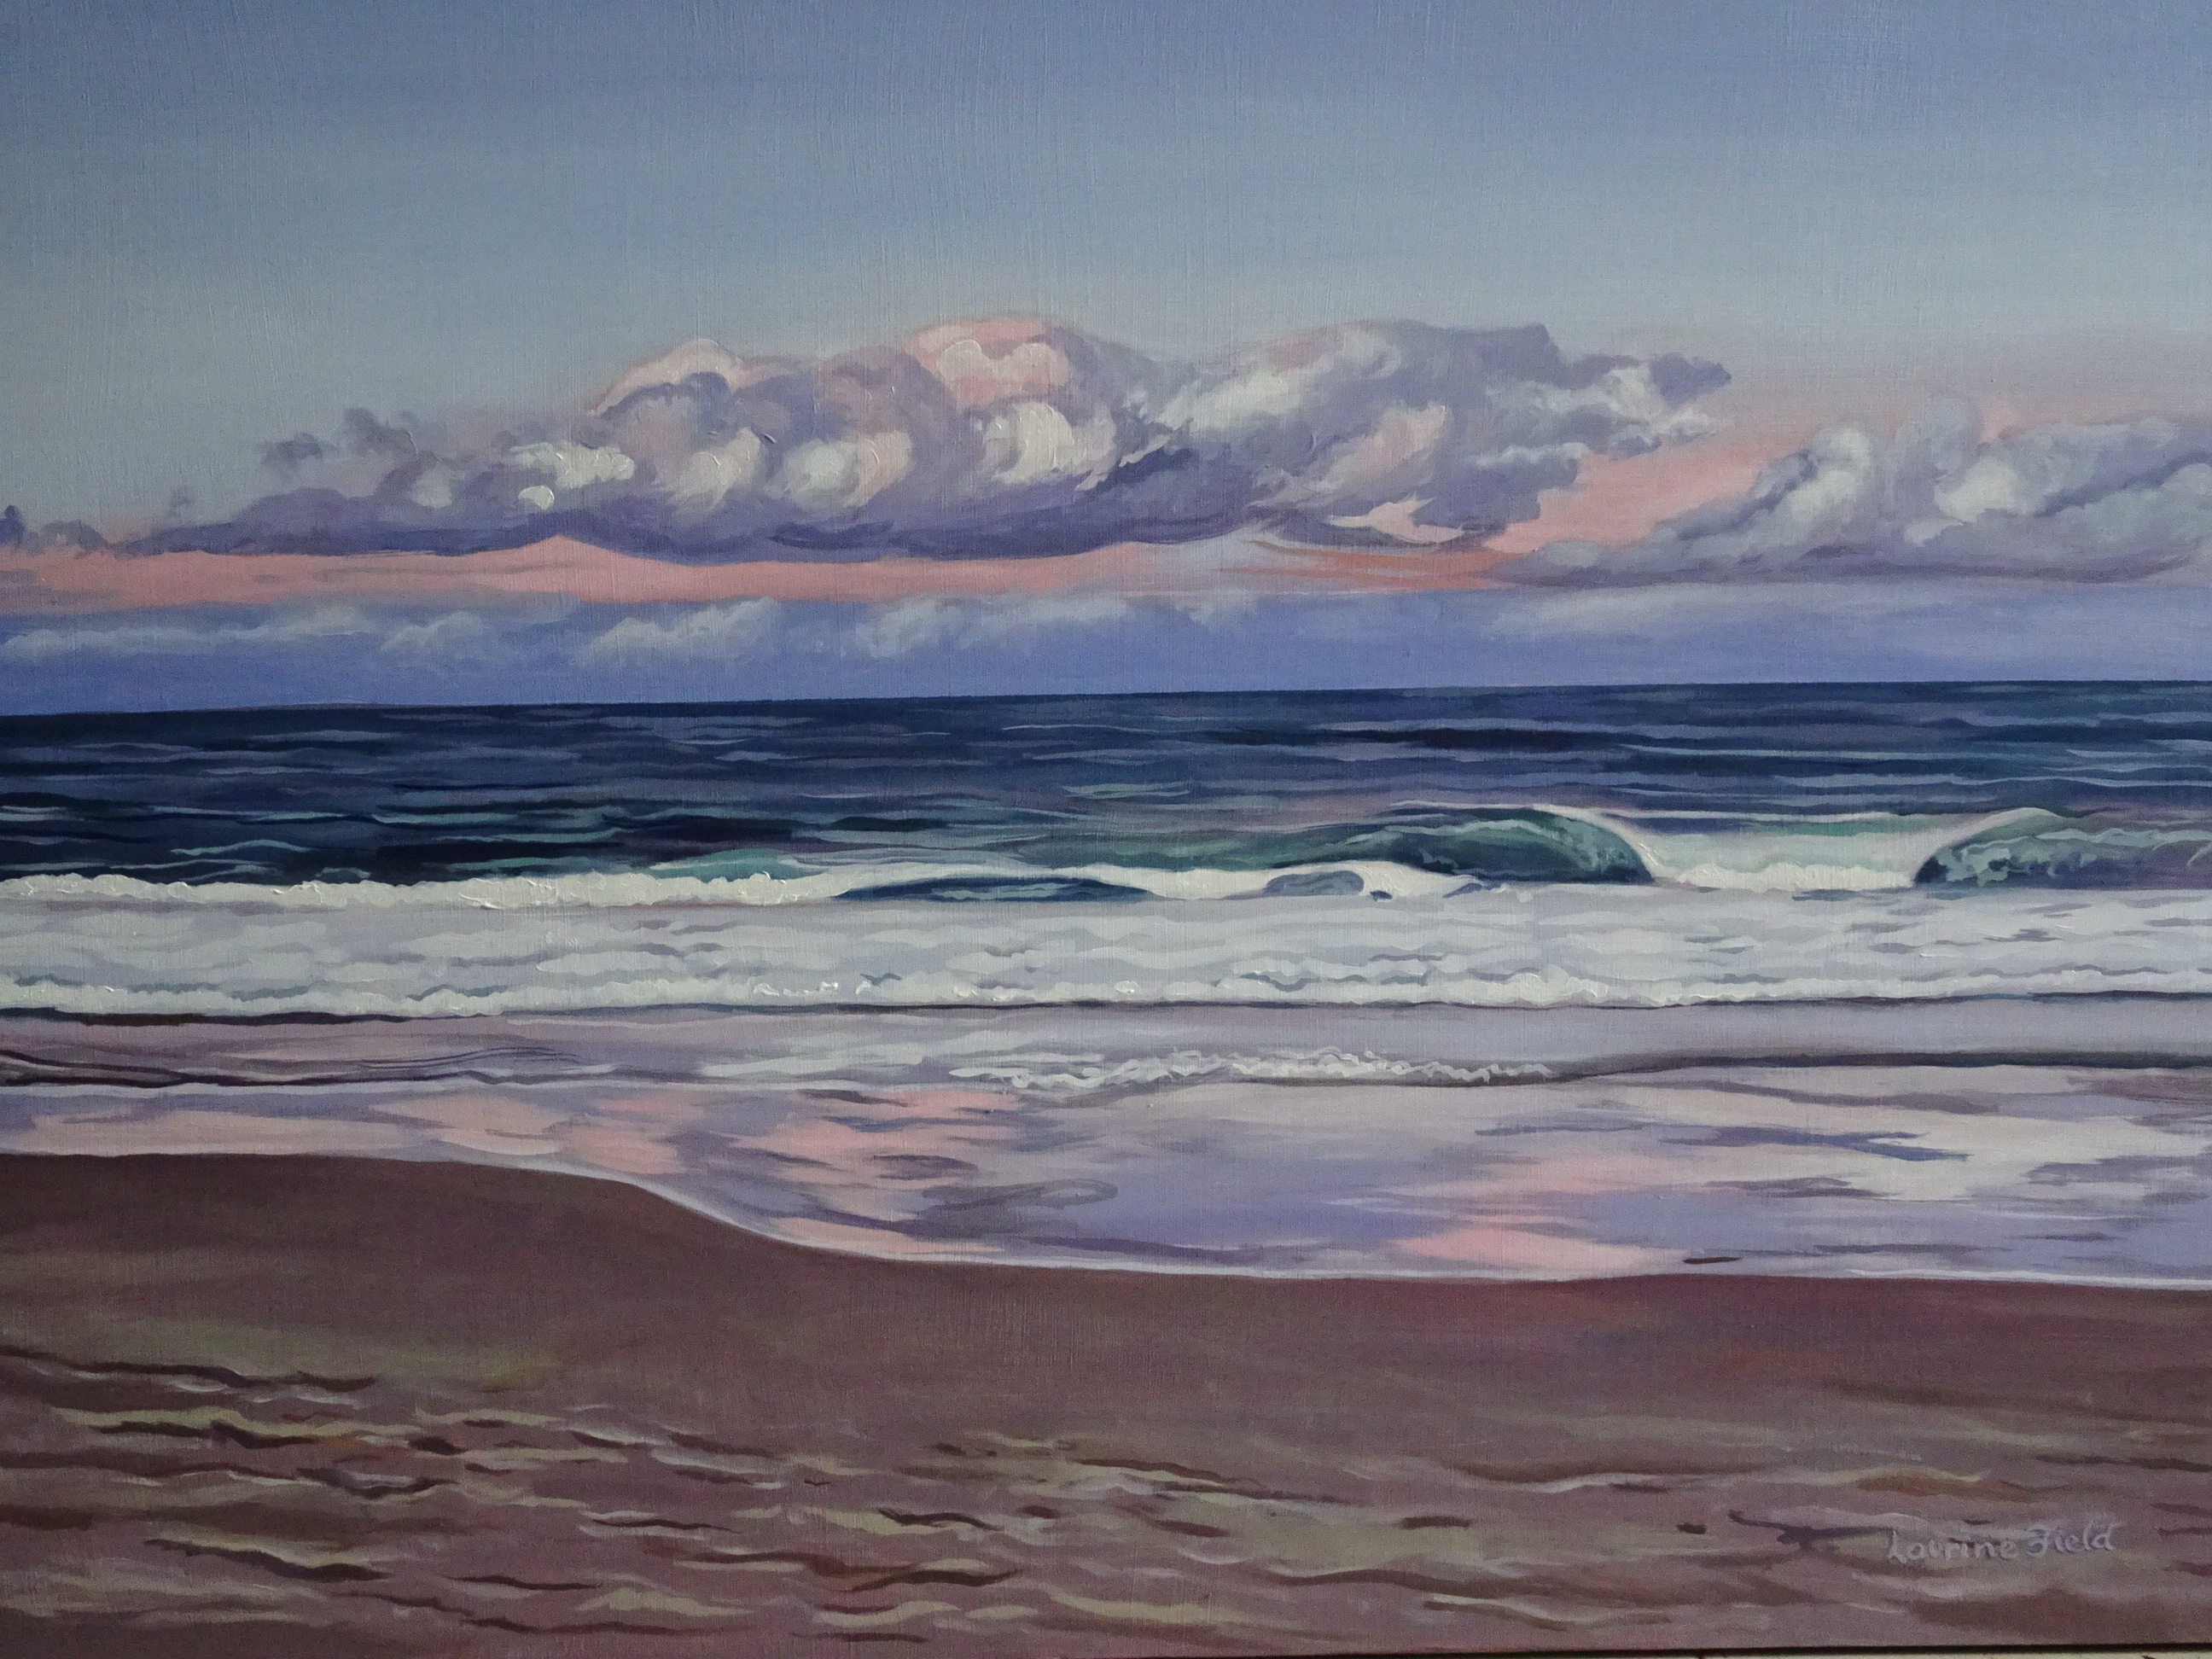 Beach bathed in pink light by Laurine Field | Lethbridge 20000 2021 Finalists | Lethbridge Gallery